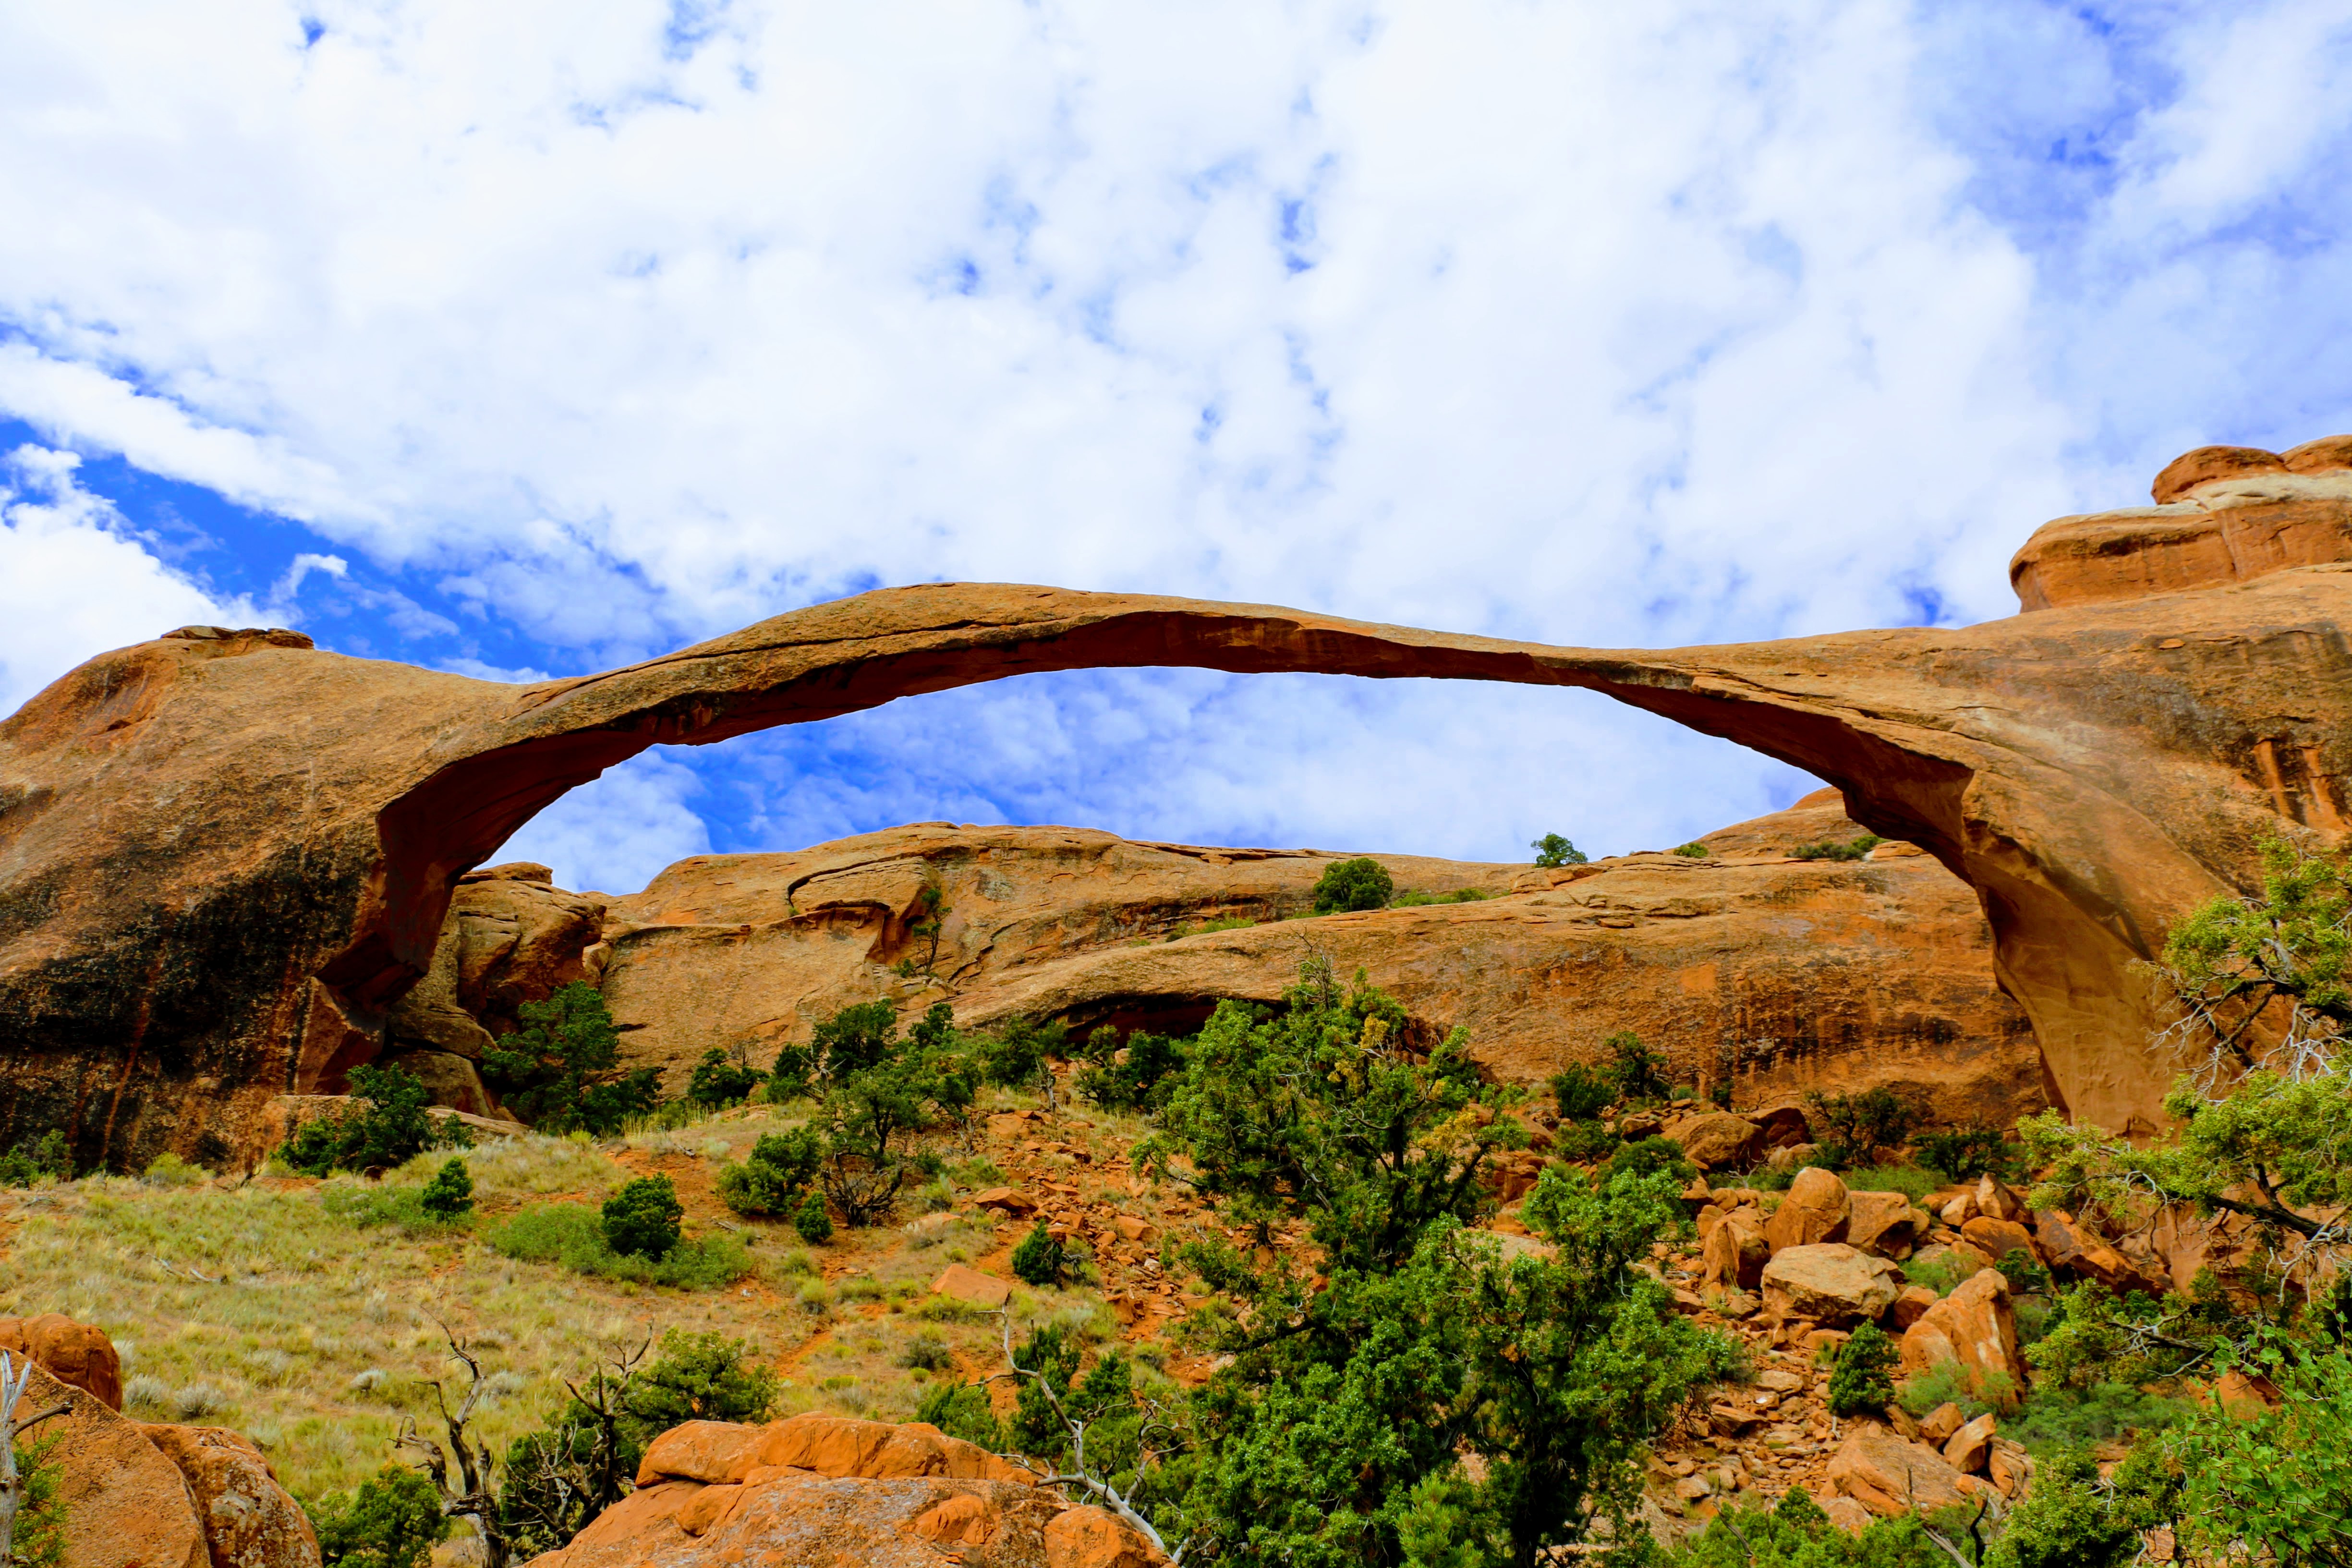 landscape arch at arches national park with photo